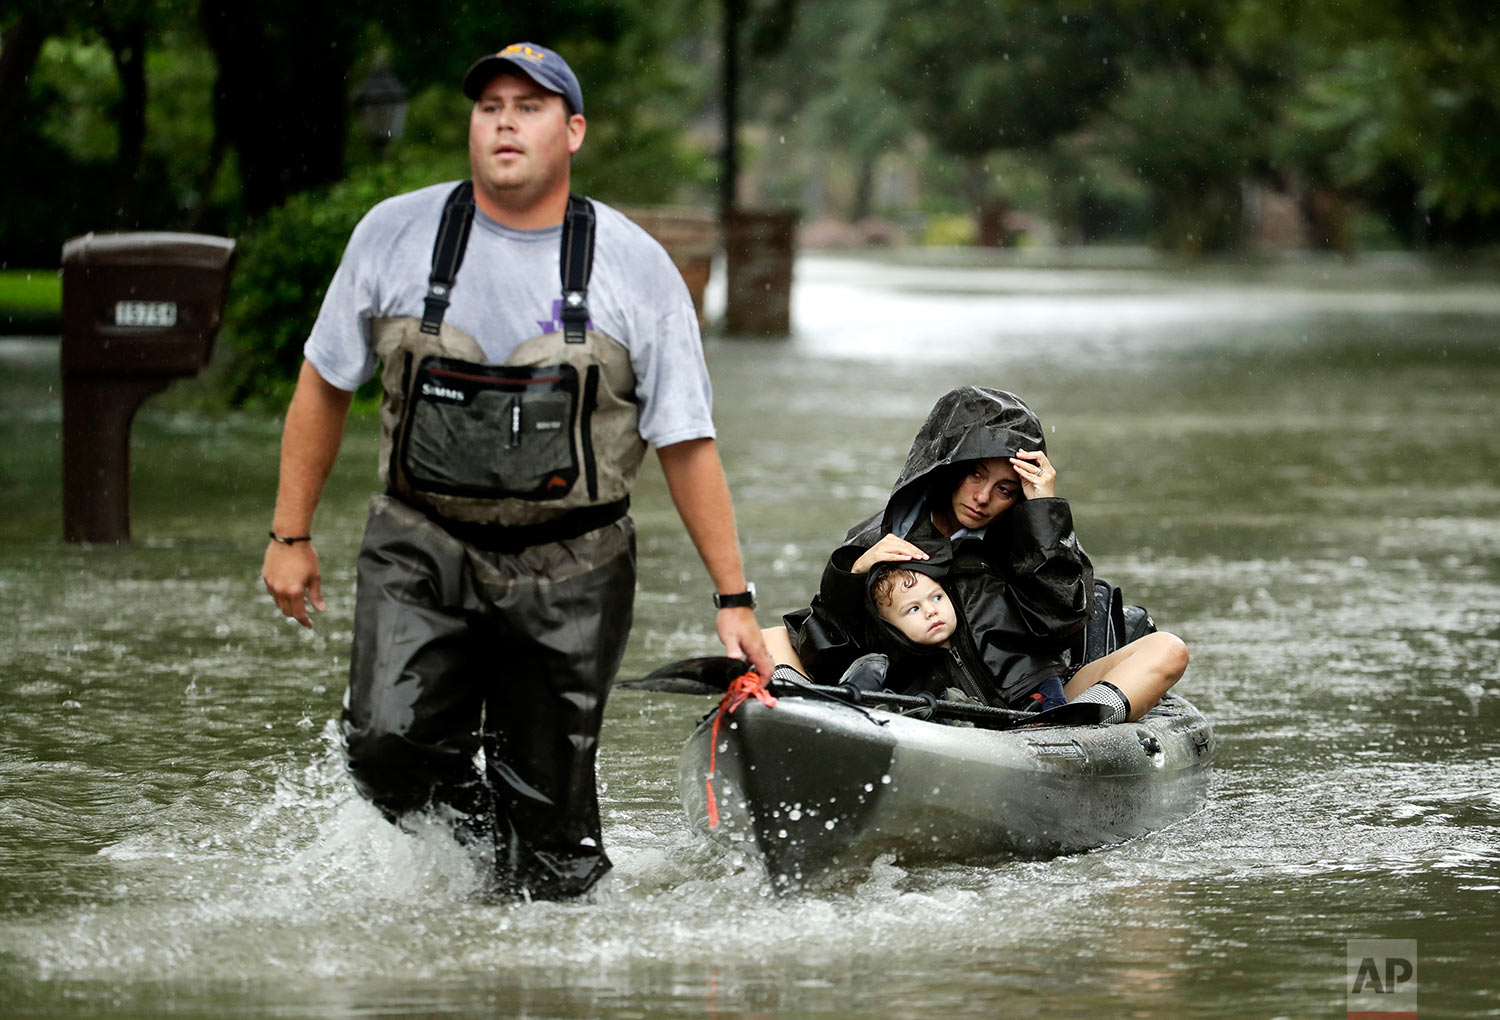 People evacuate a neighborhood inundated by floodwaters from Tropical Storm Harvey on Monday, Aug. 28, 2017, in Houston, Texas. (AP Photo/Charlie Riedel)